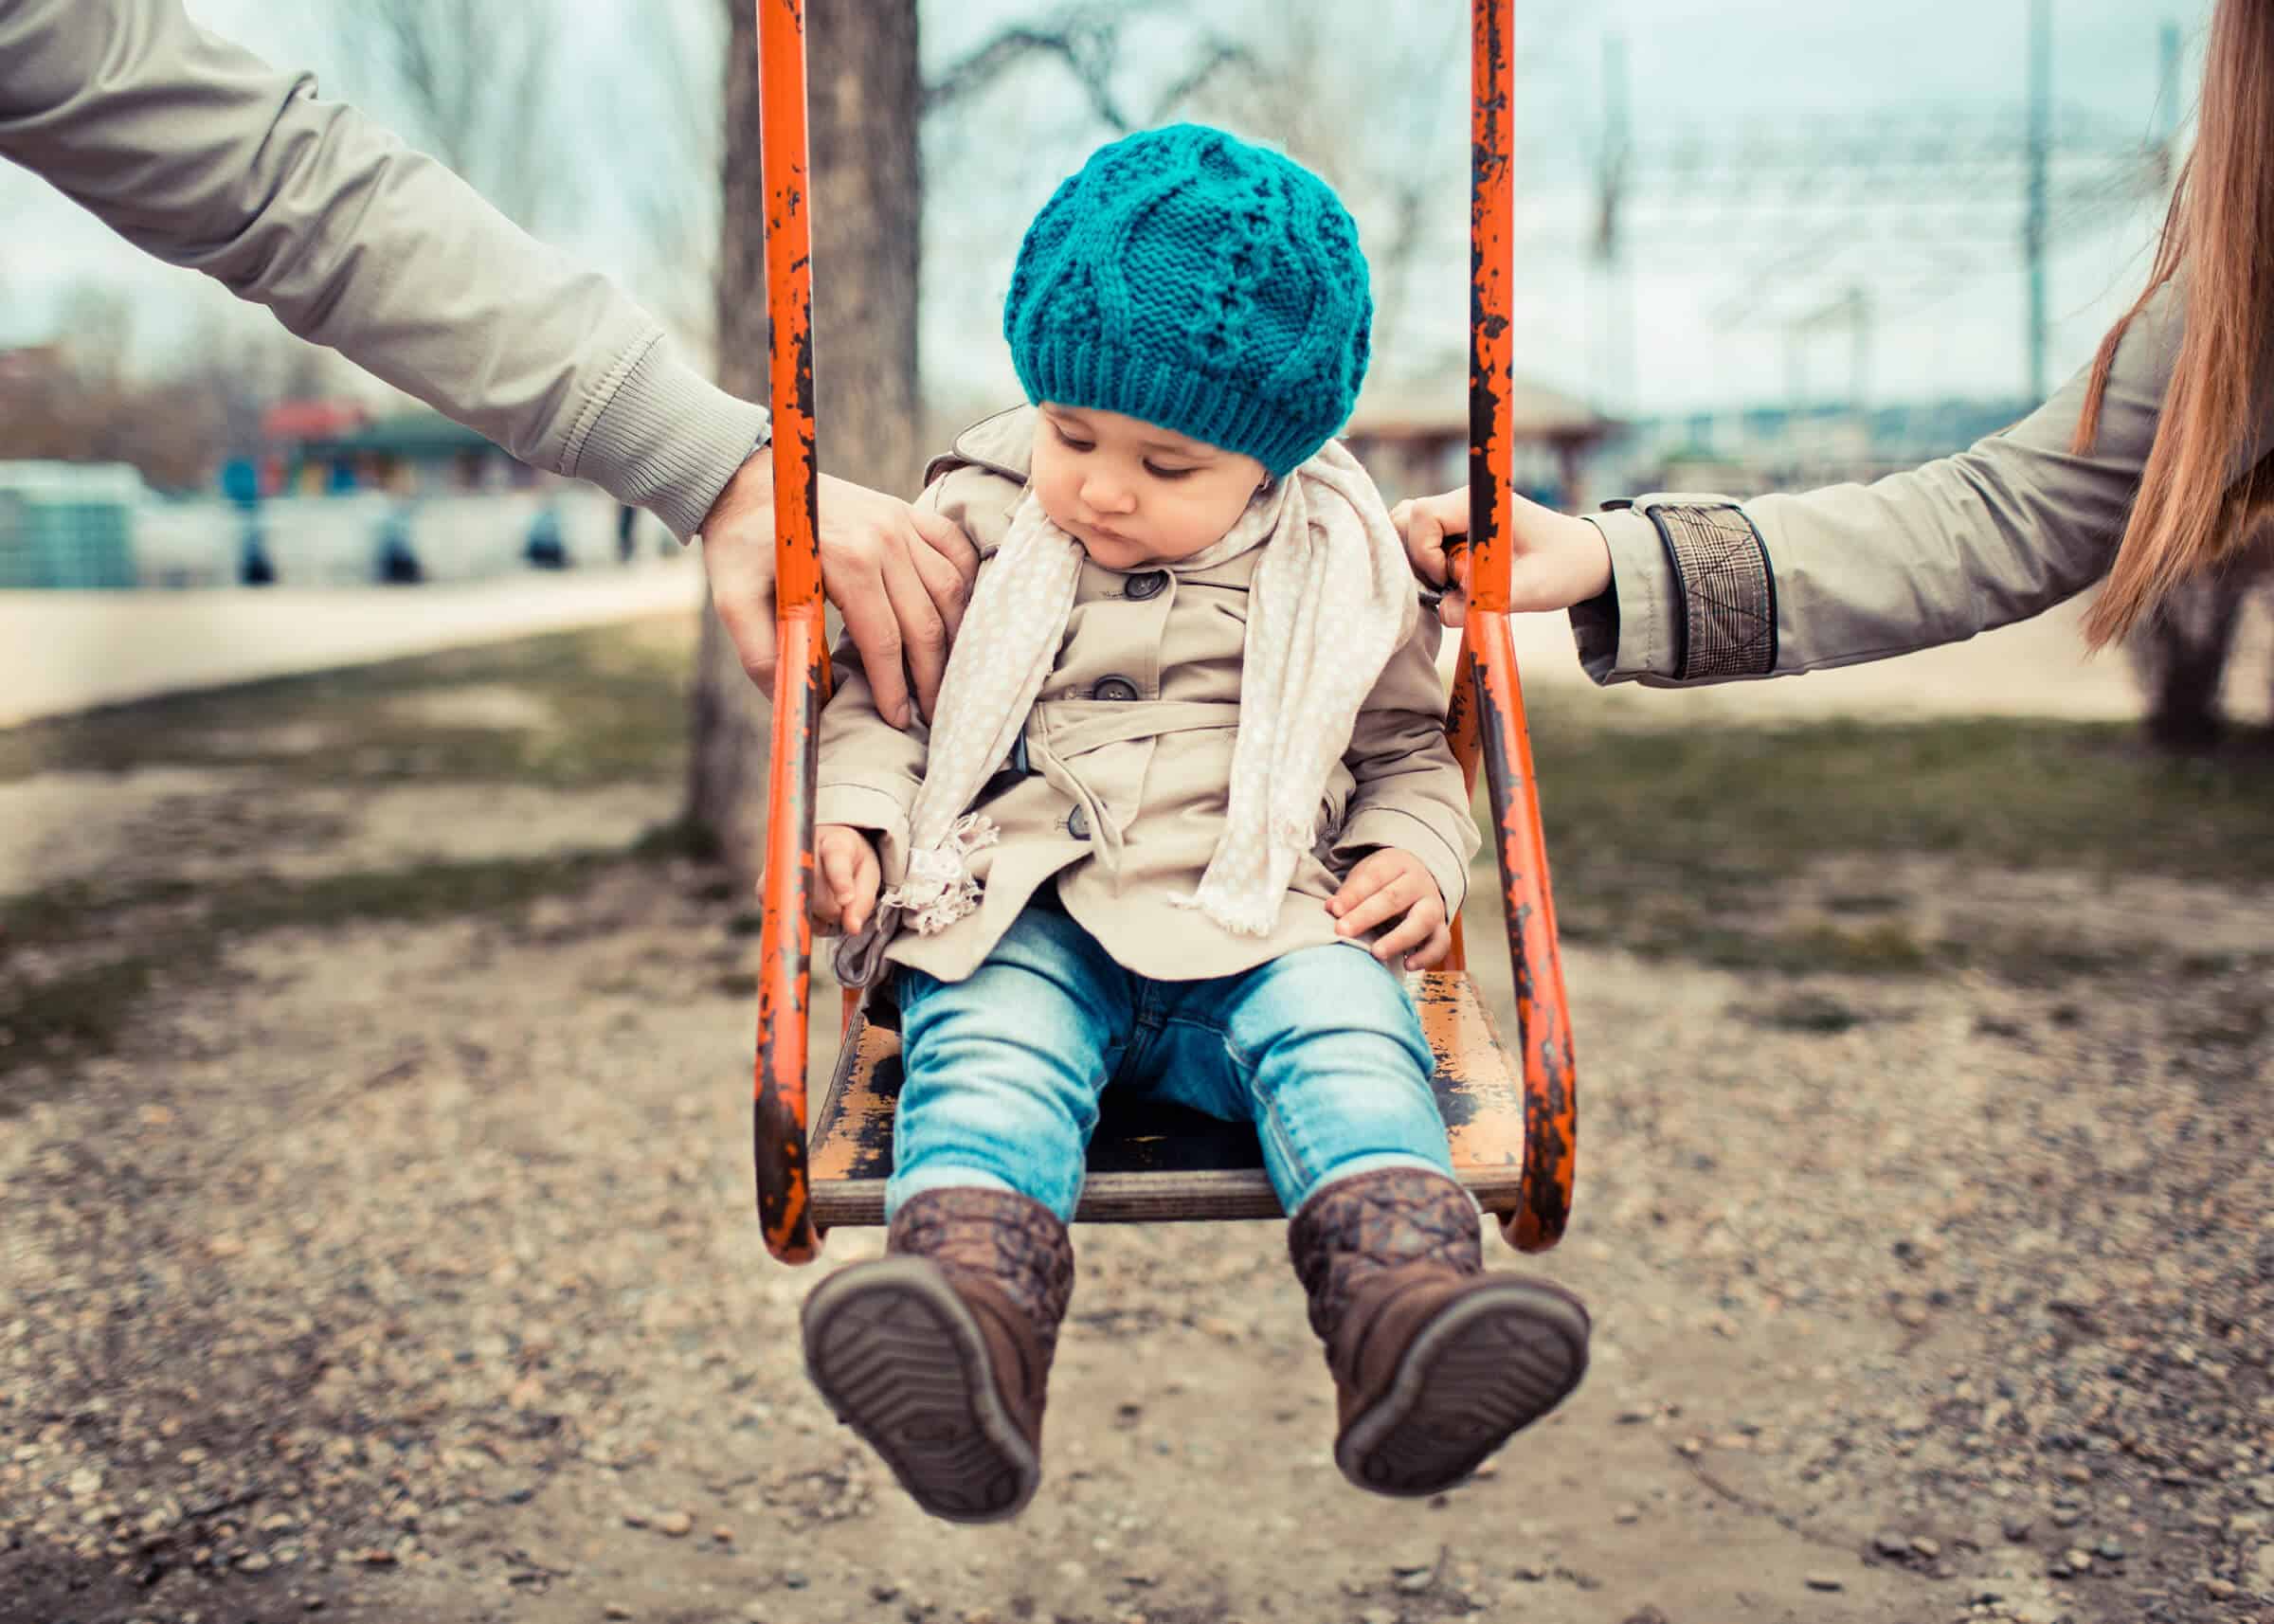 A small girl having fun on a swing, with her parents supporting her on each side.